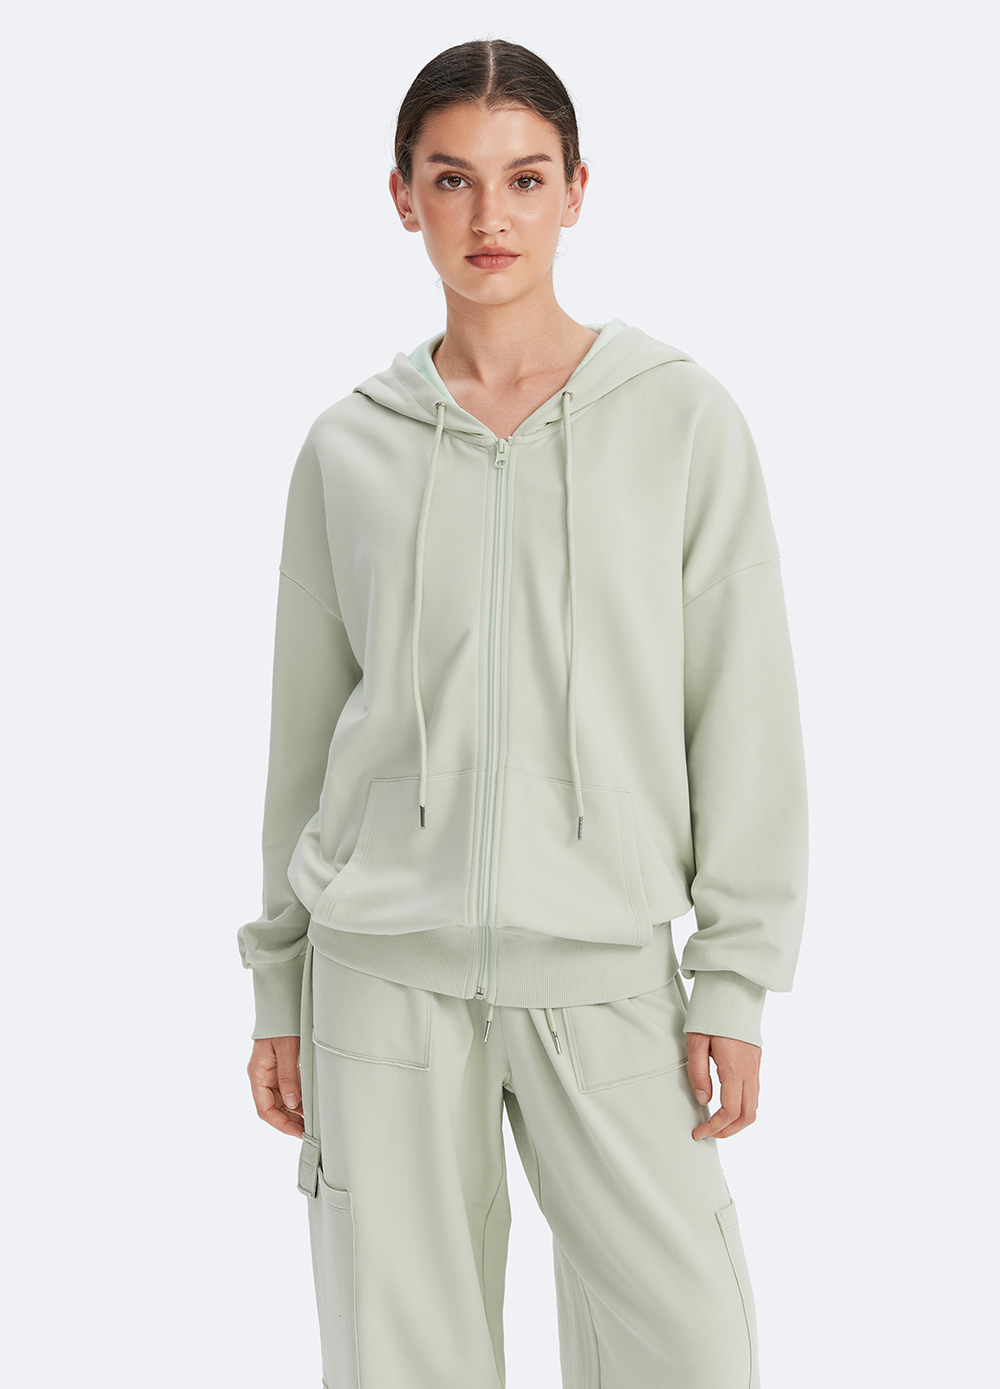 BetterMe Fresh Mint Green Zip Up Hoodie with Pockets for women